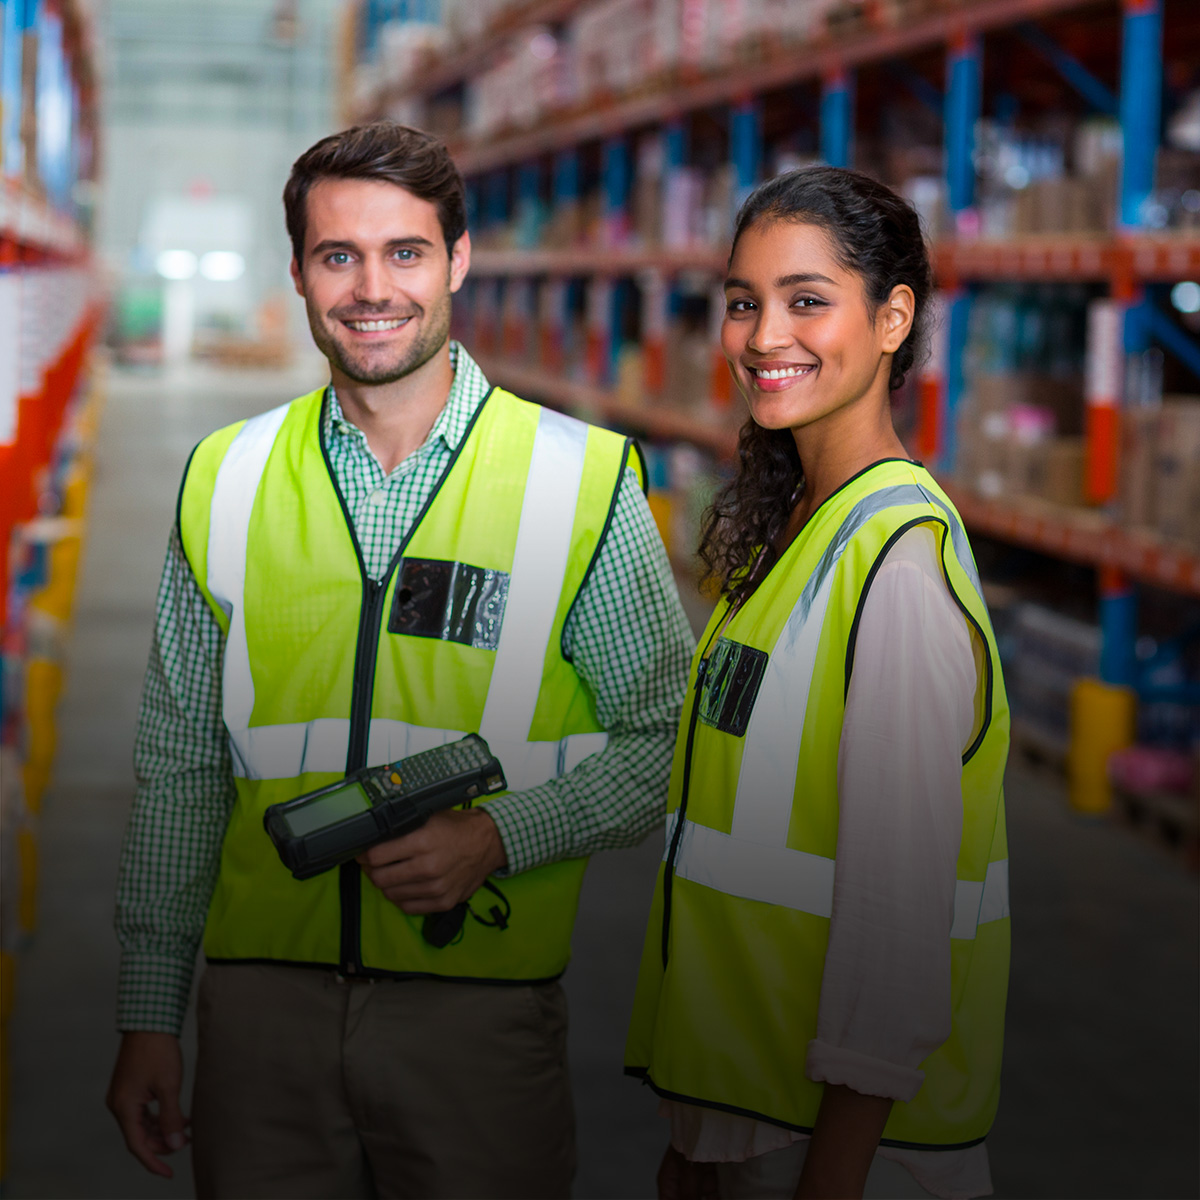 Two warehouse workers in safety vests smiling at the camera while standing in a storage facility.